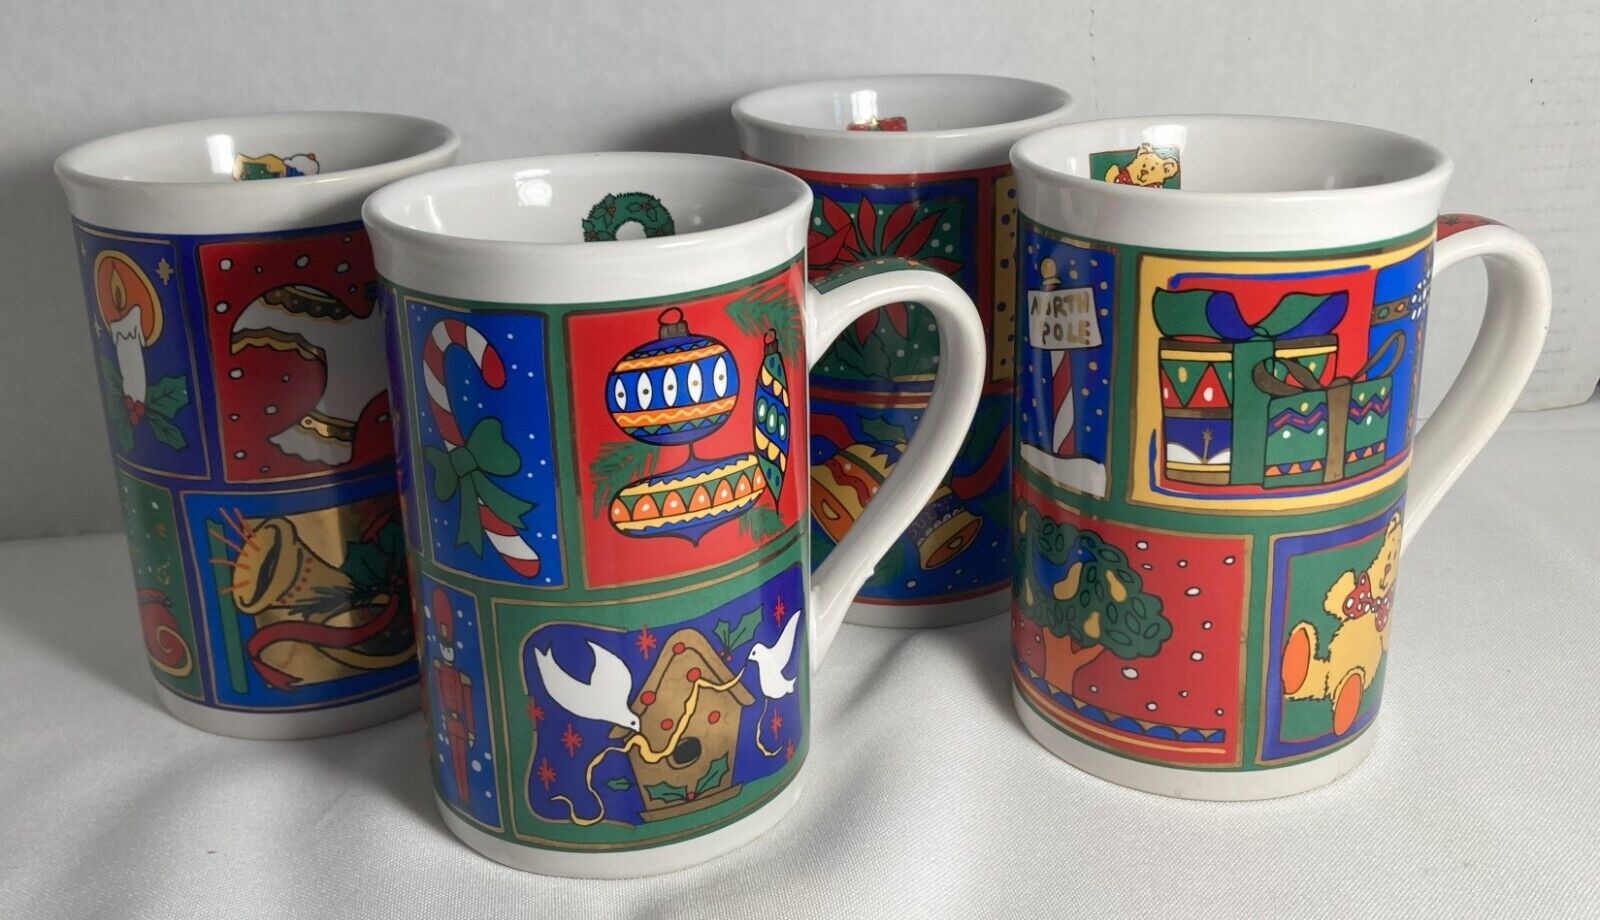 1997 Fine Works Designs Limited Edition Christmas Coffee Mugs Set of 4